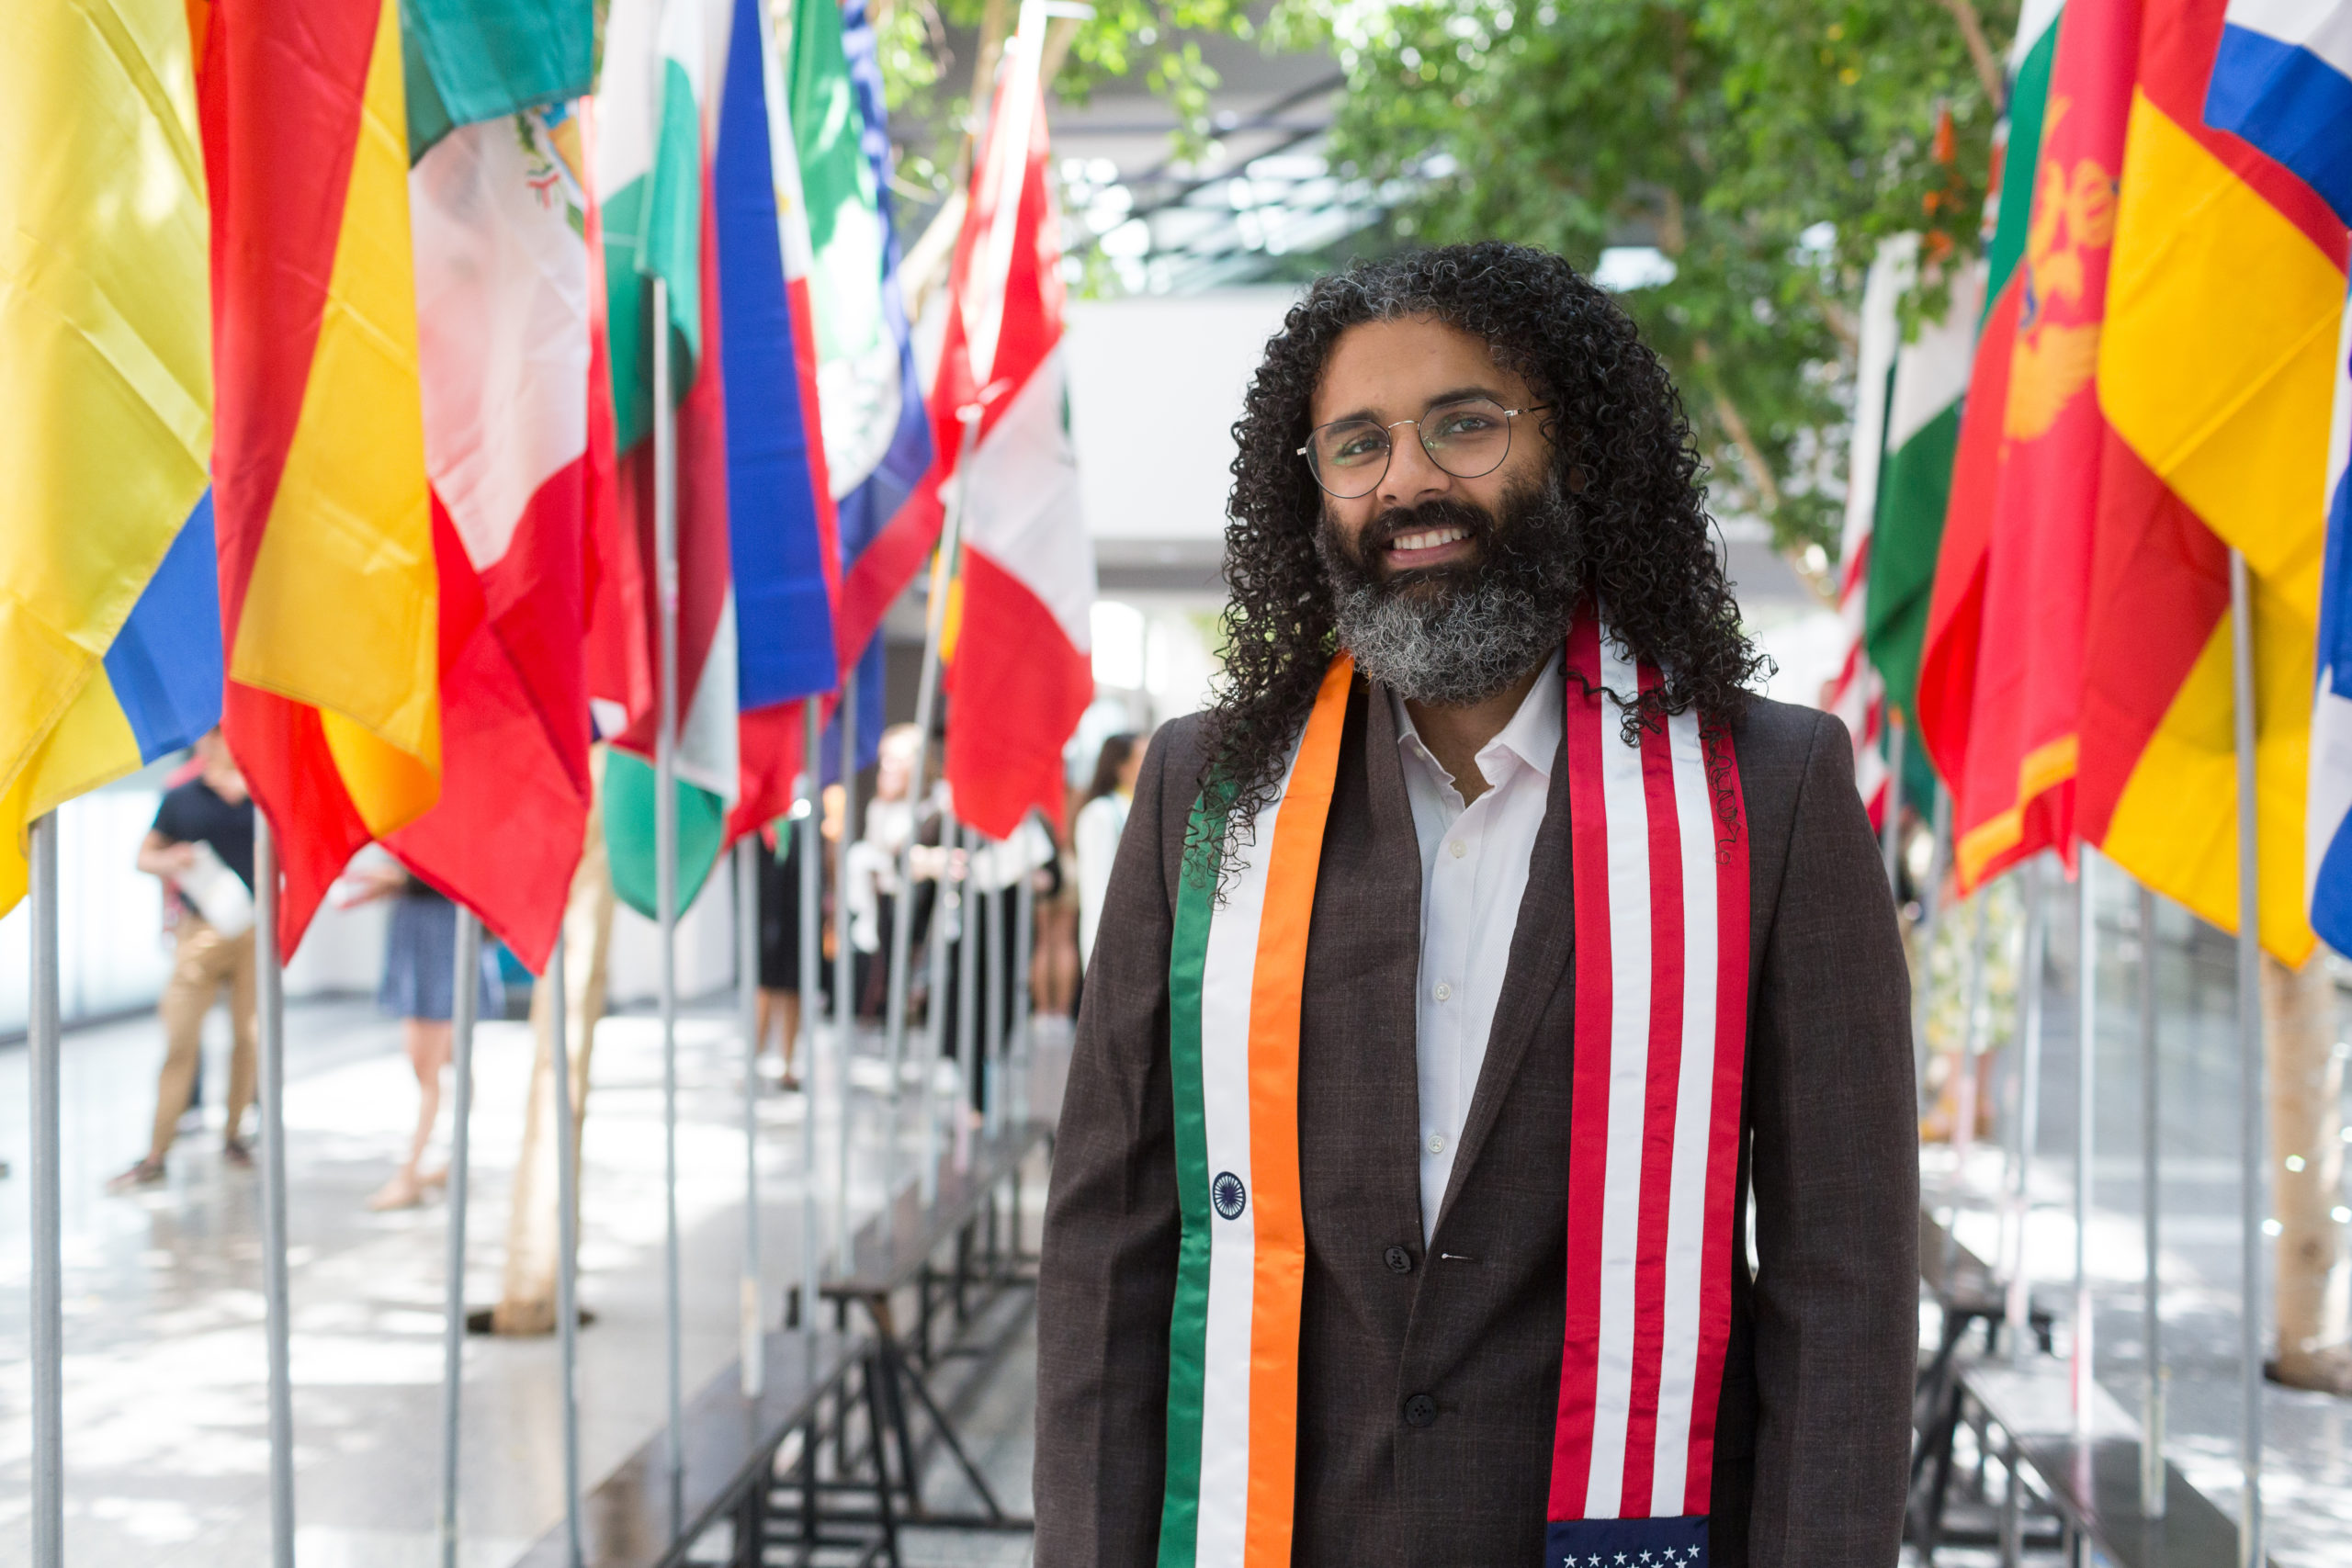 Krushan Naik stands in front of rows of international flags inside University Hall.